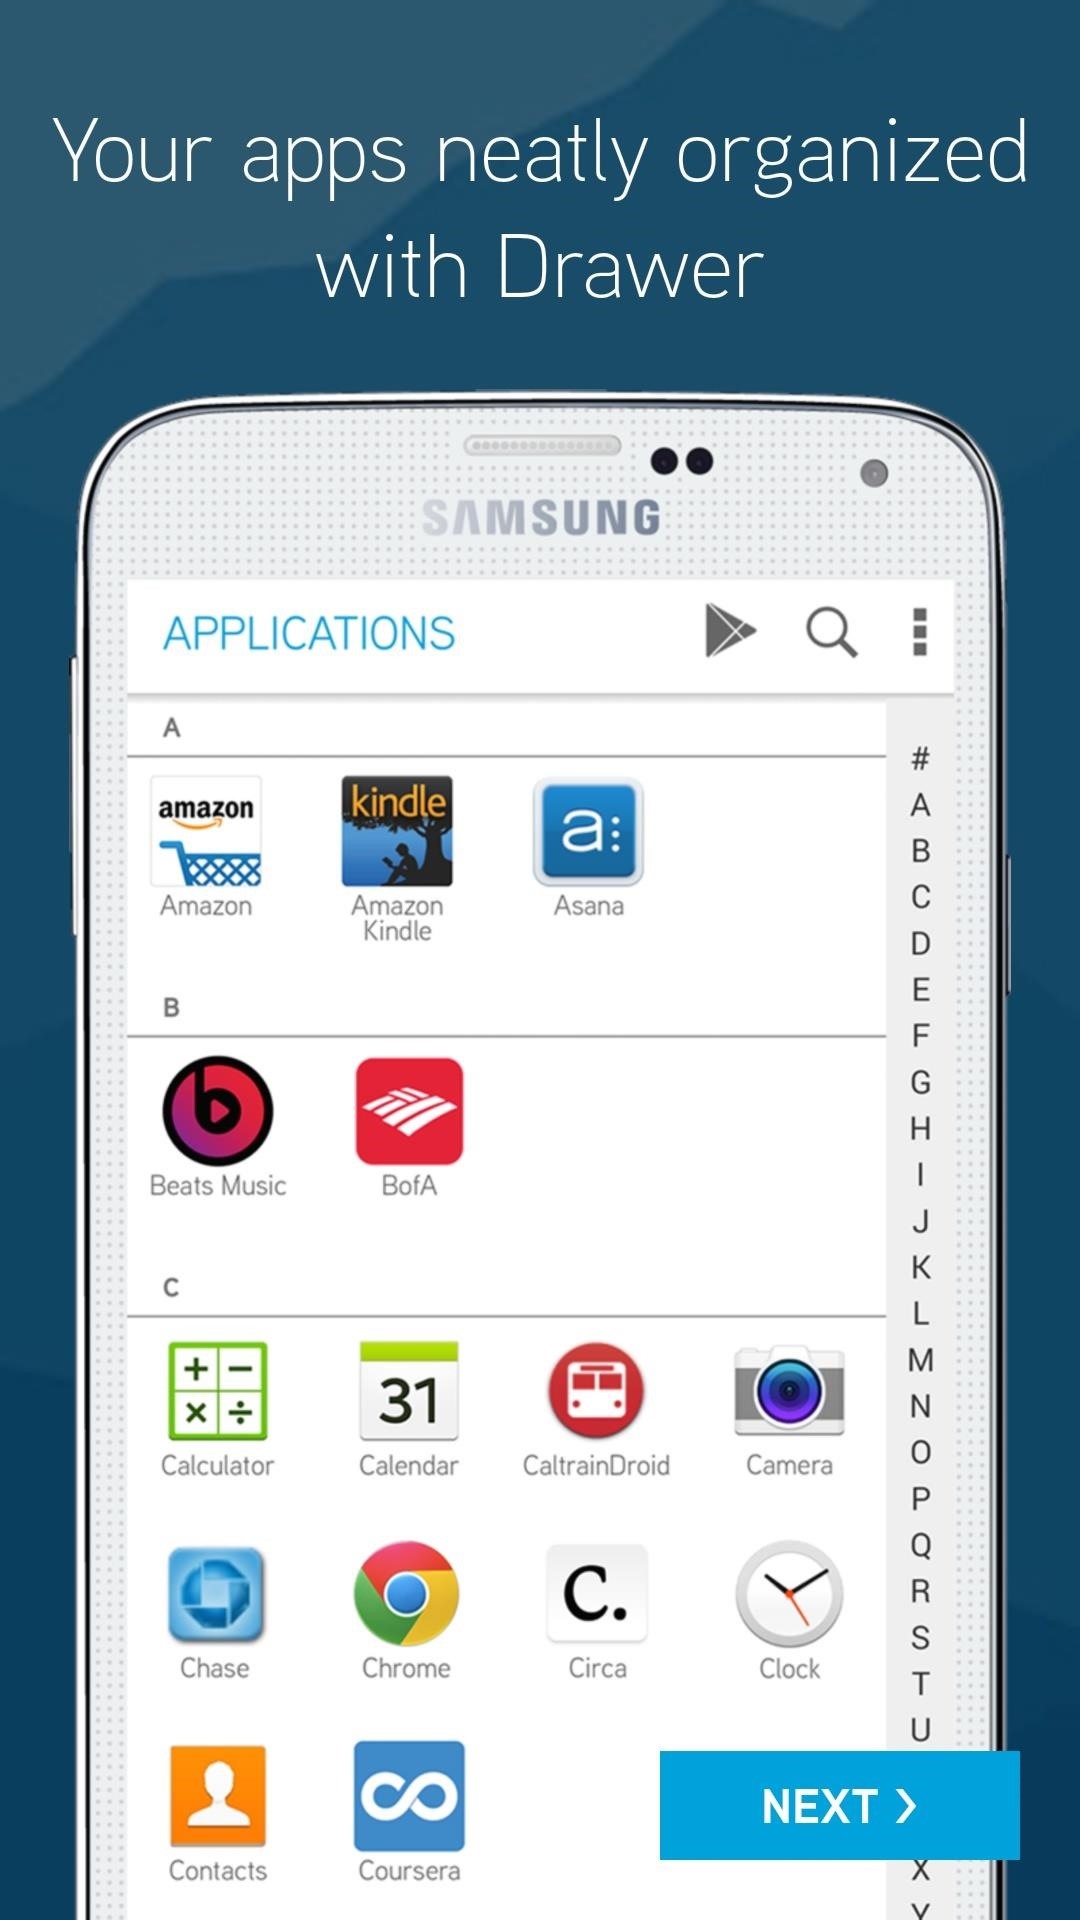 Samsung Releases Its New Terrain Home Launcher on the Play Store